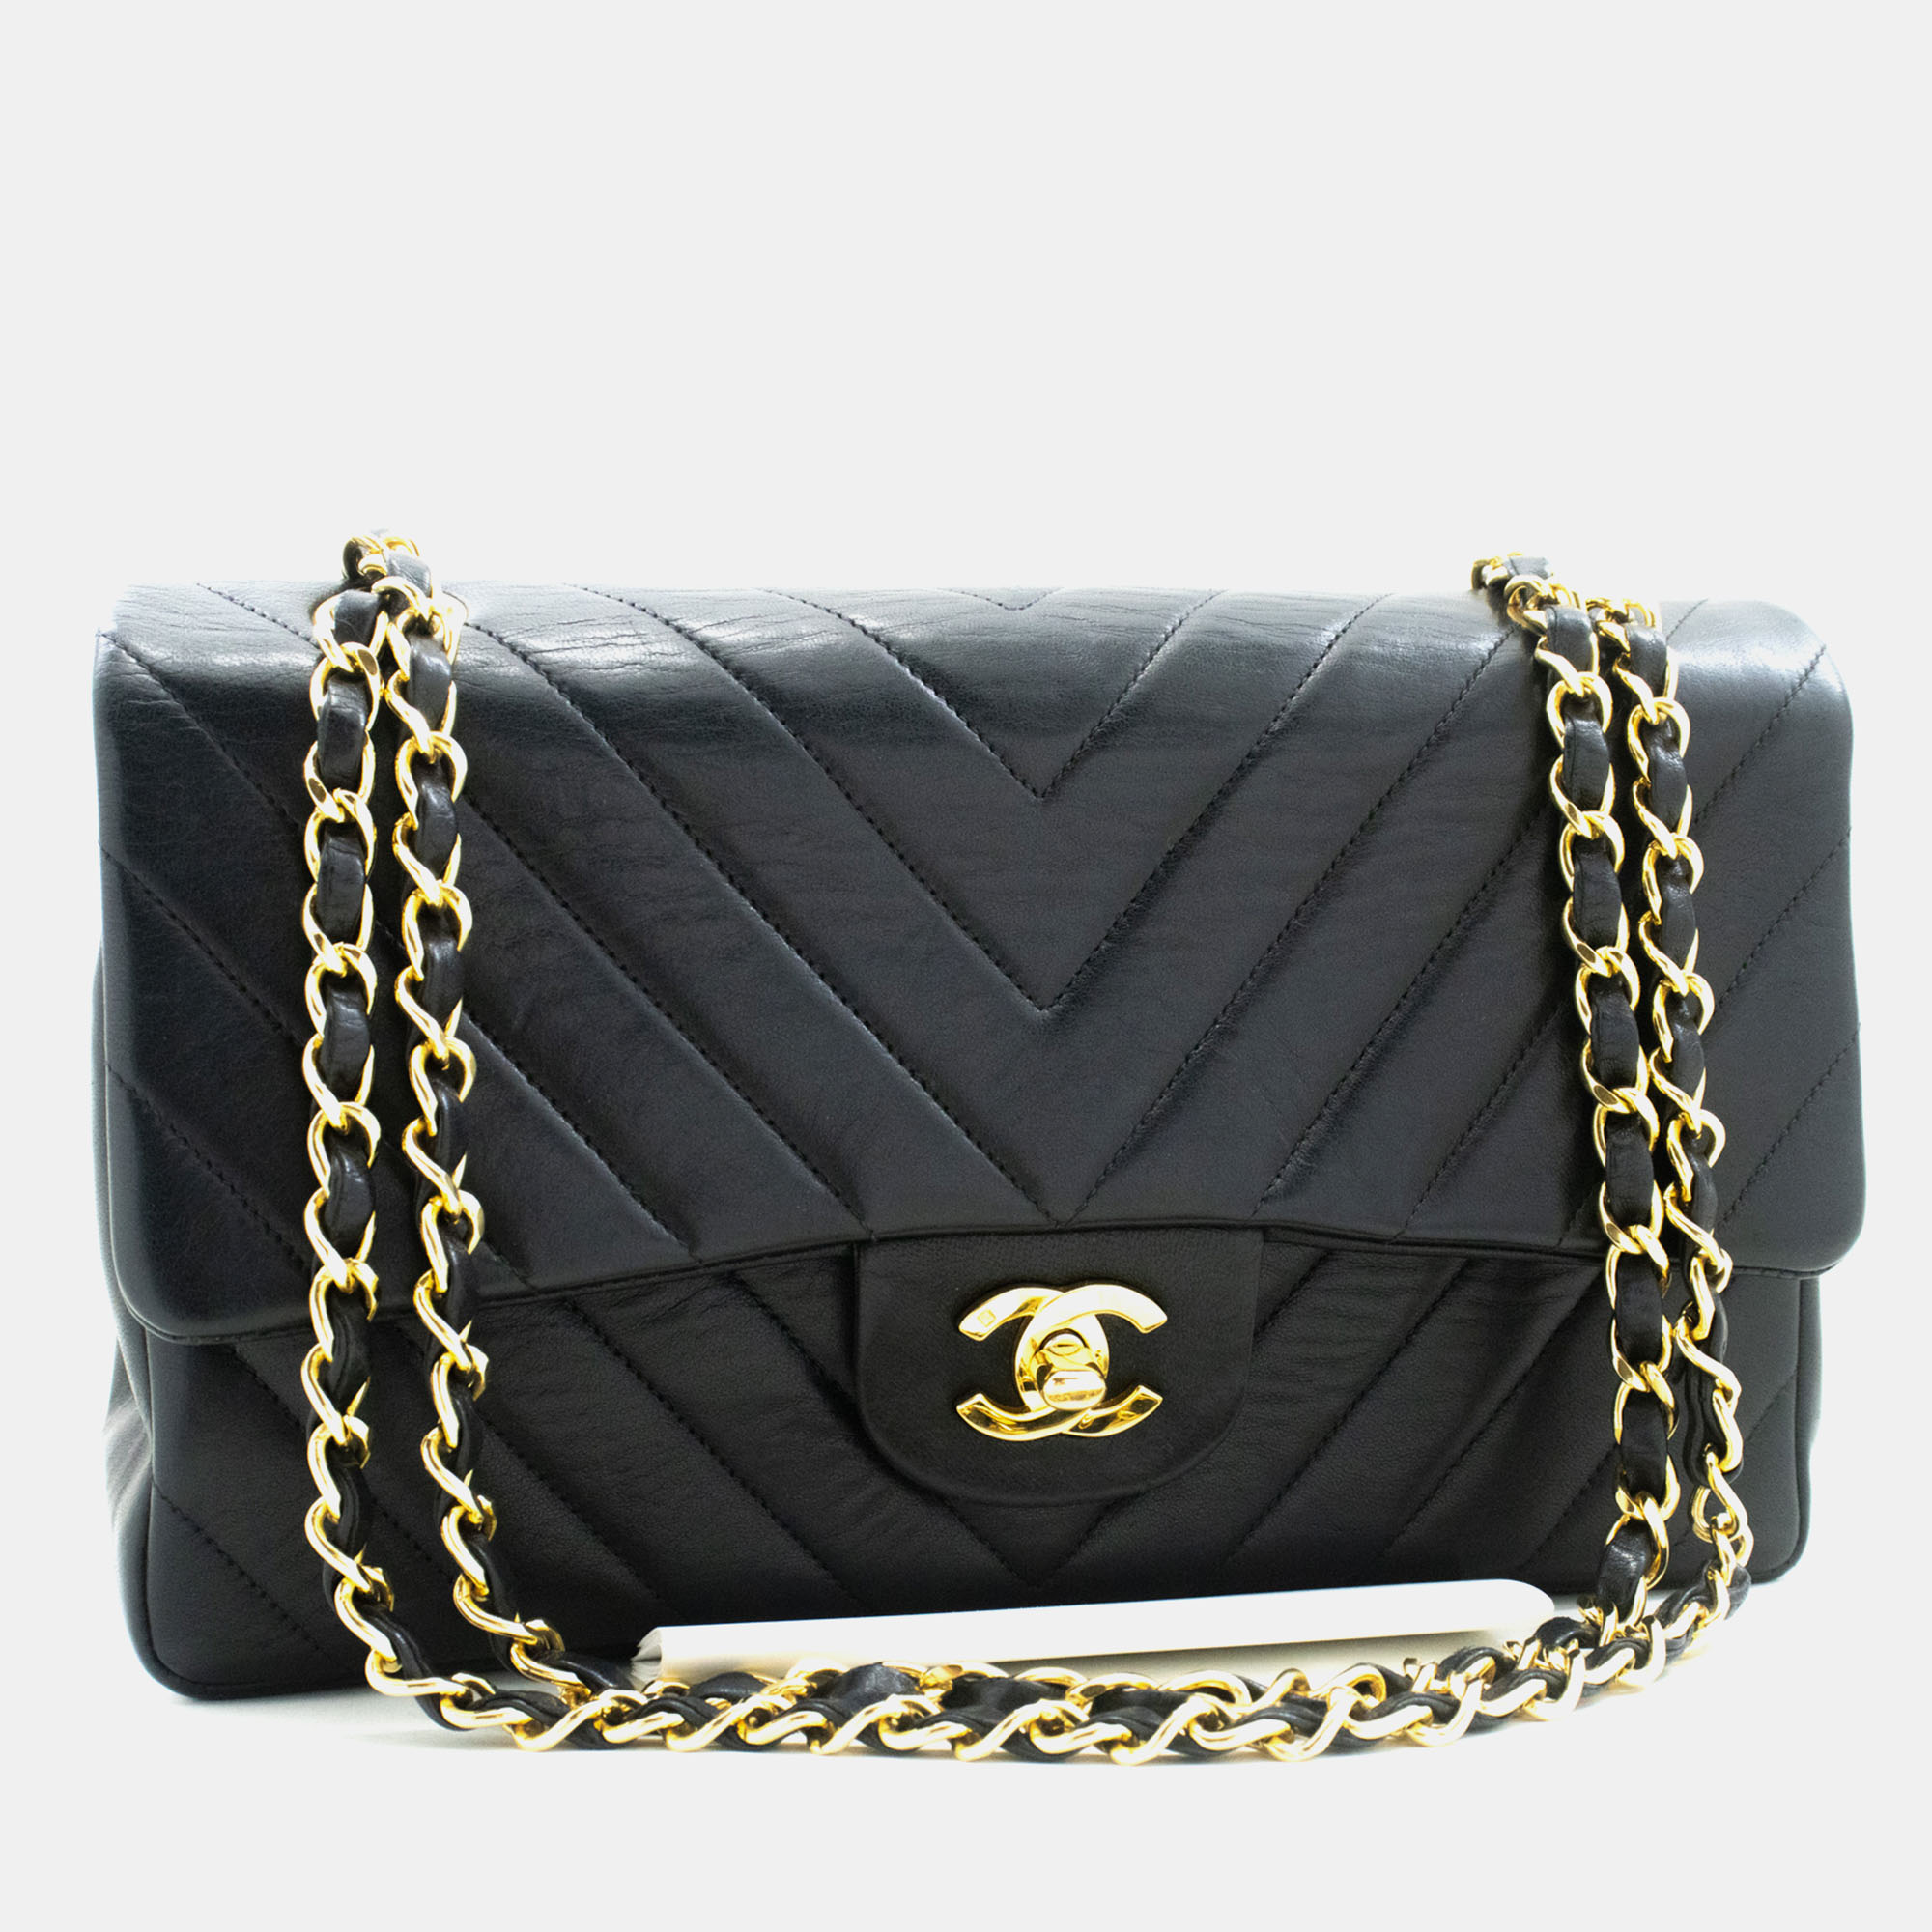 Chanel black leather small classic double flap shoulder bags